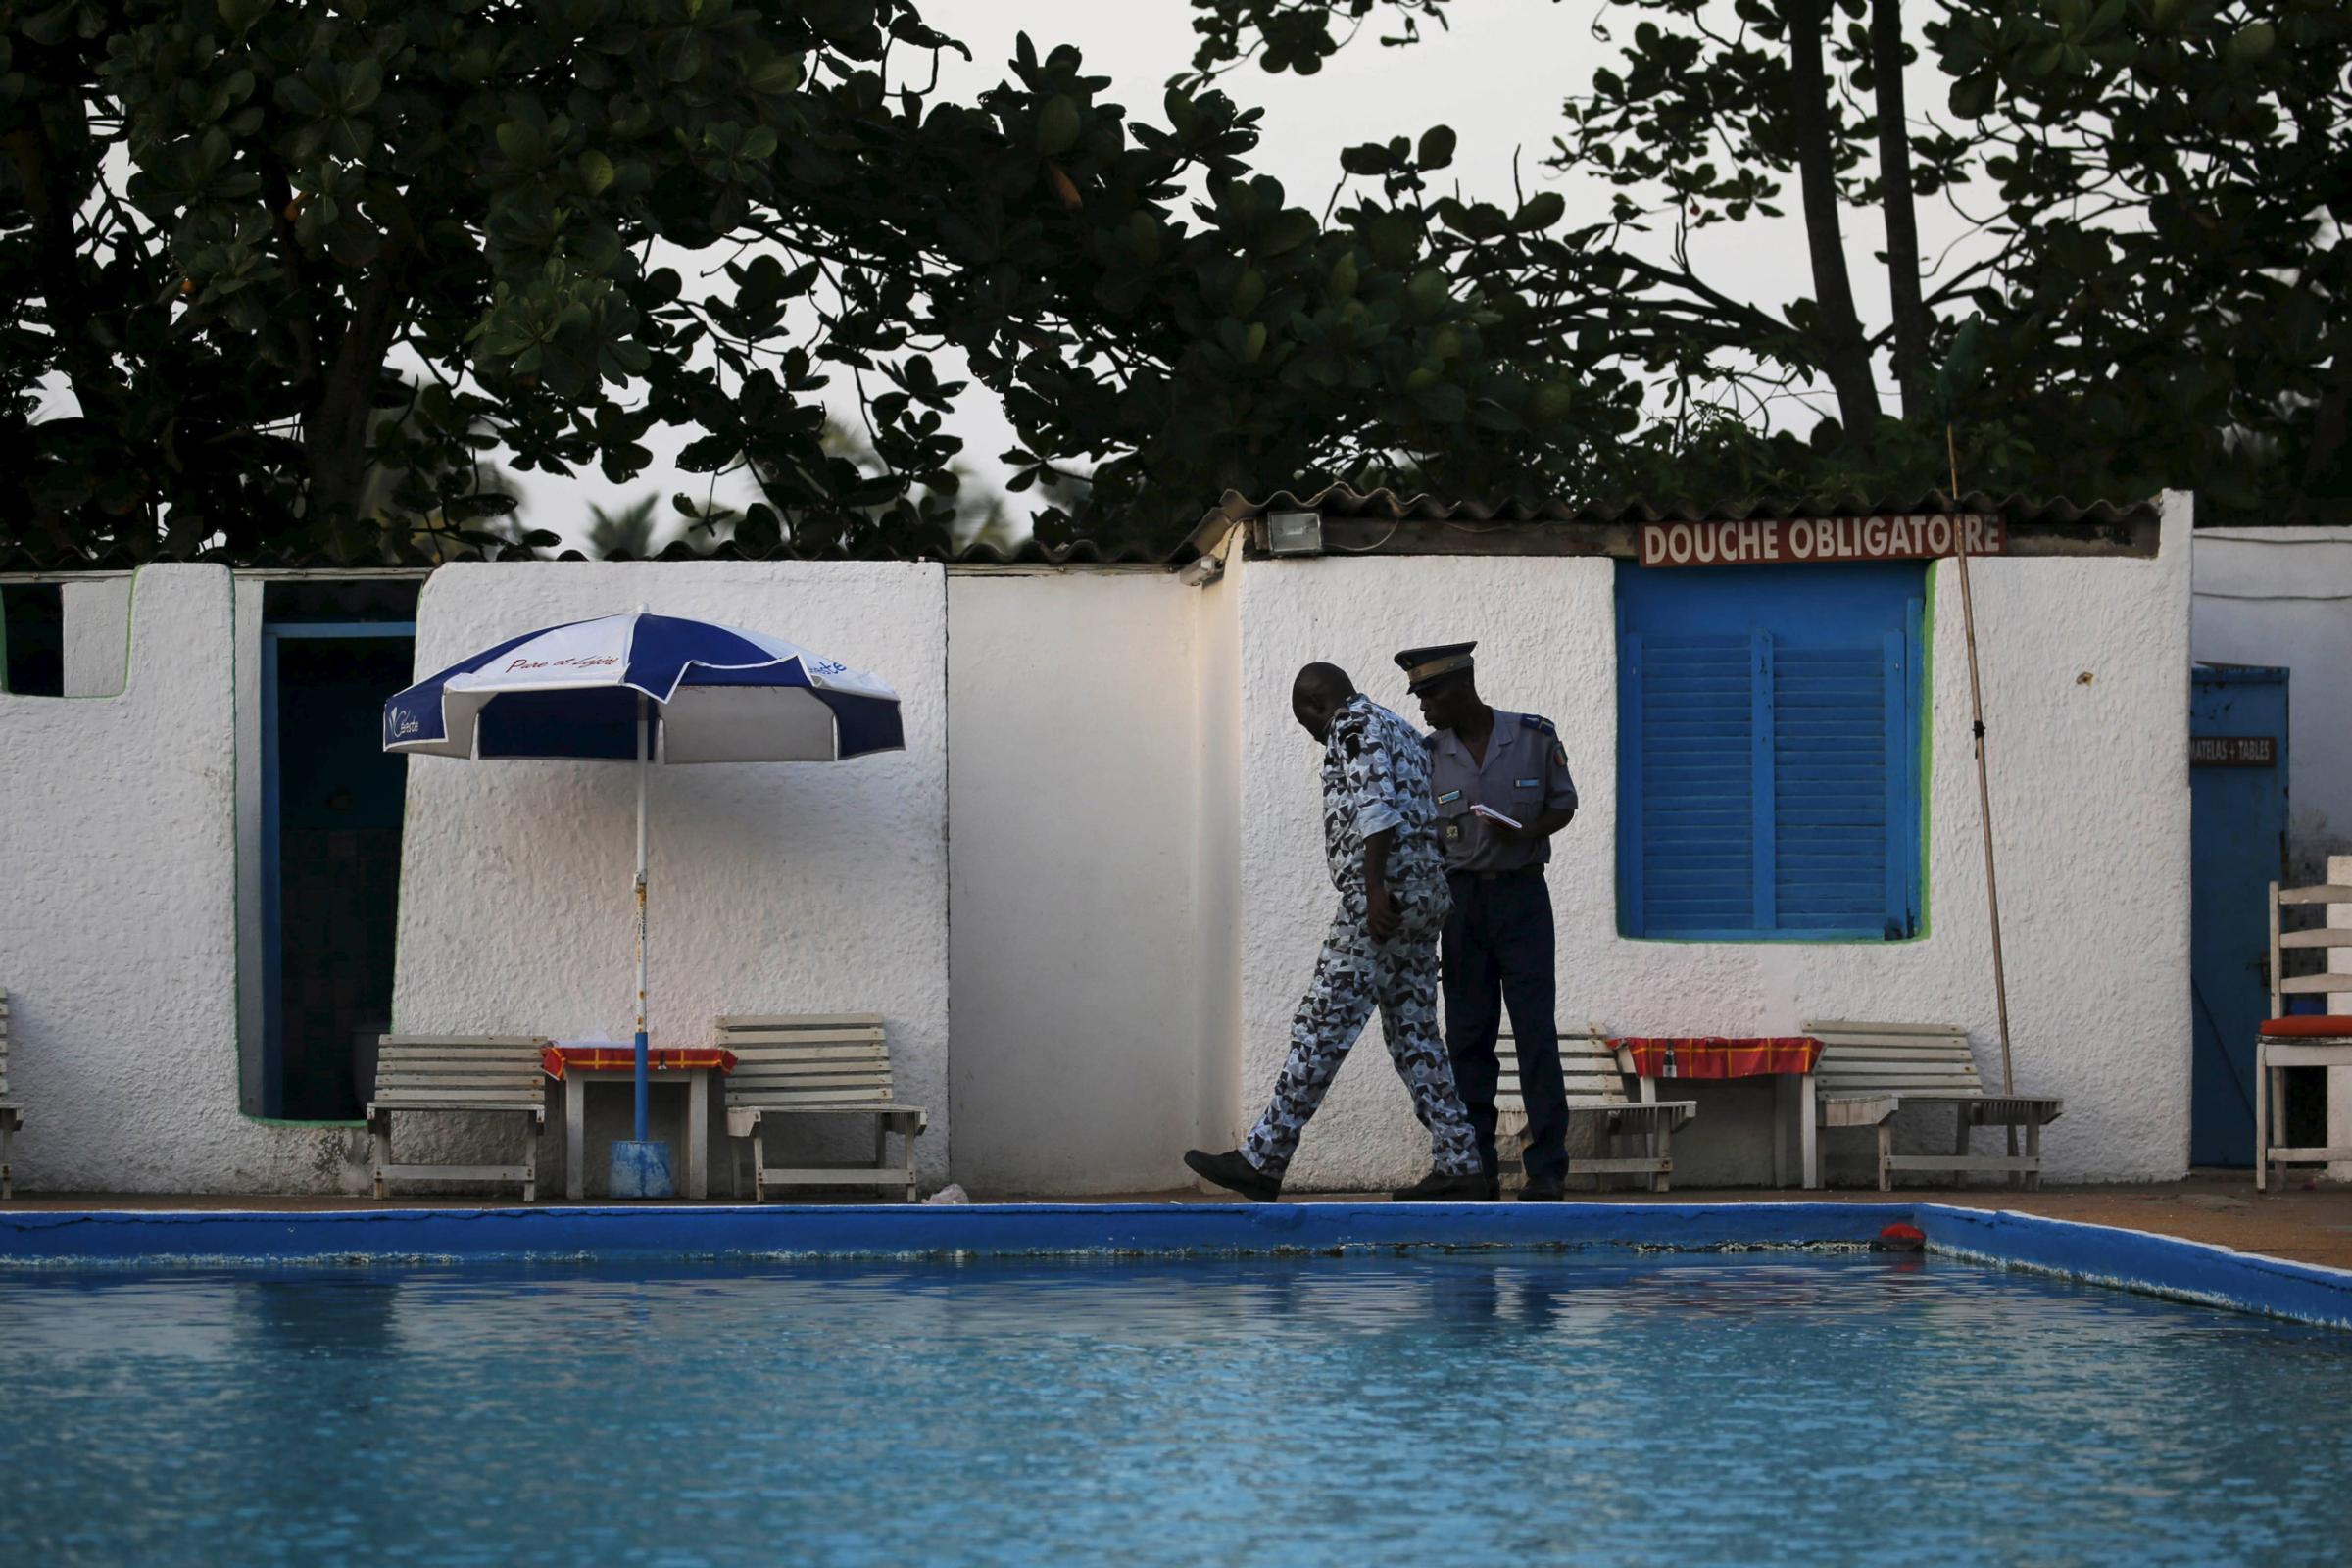 Security officers examine a hotel after an attack in Grand Bassam, Ivory Coast, March 13, 2016. REUTERS/Joe Penney